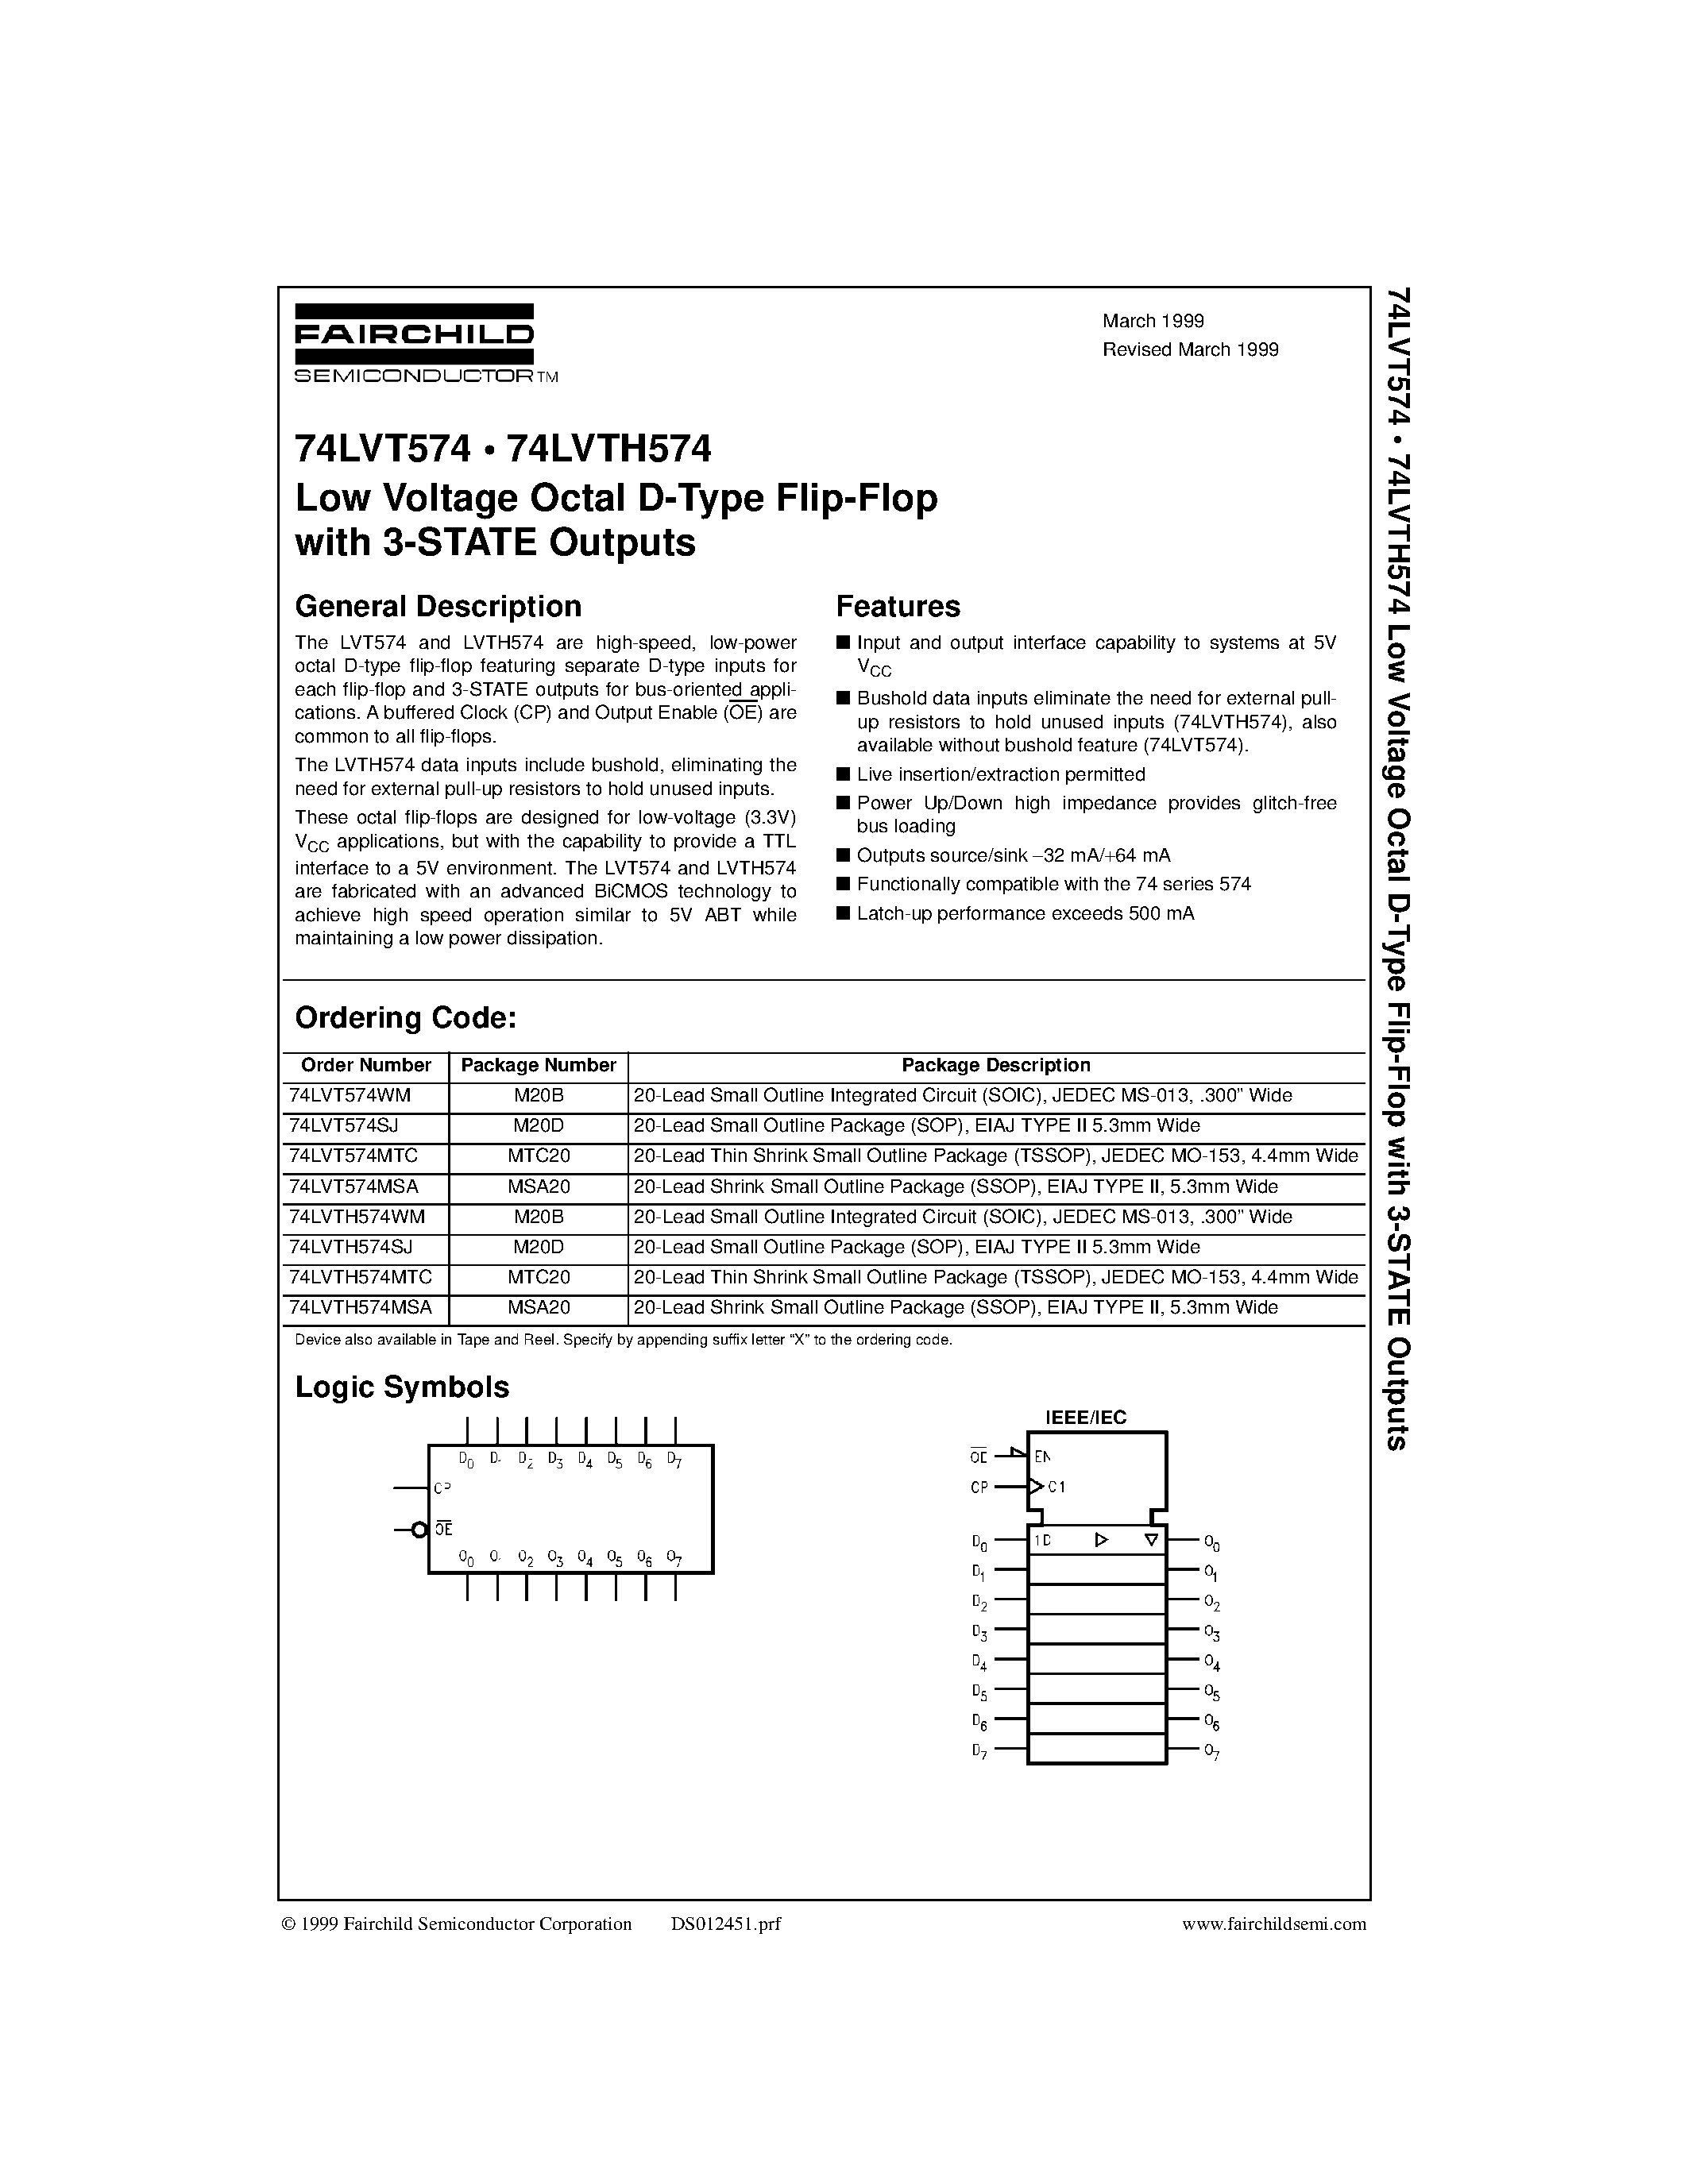 Datasheet 74LVT574 - Low Voltage Octal D-Type Flip-Flop with 3-STATE Outputs page 1